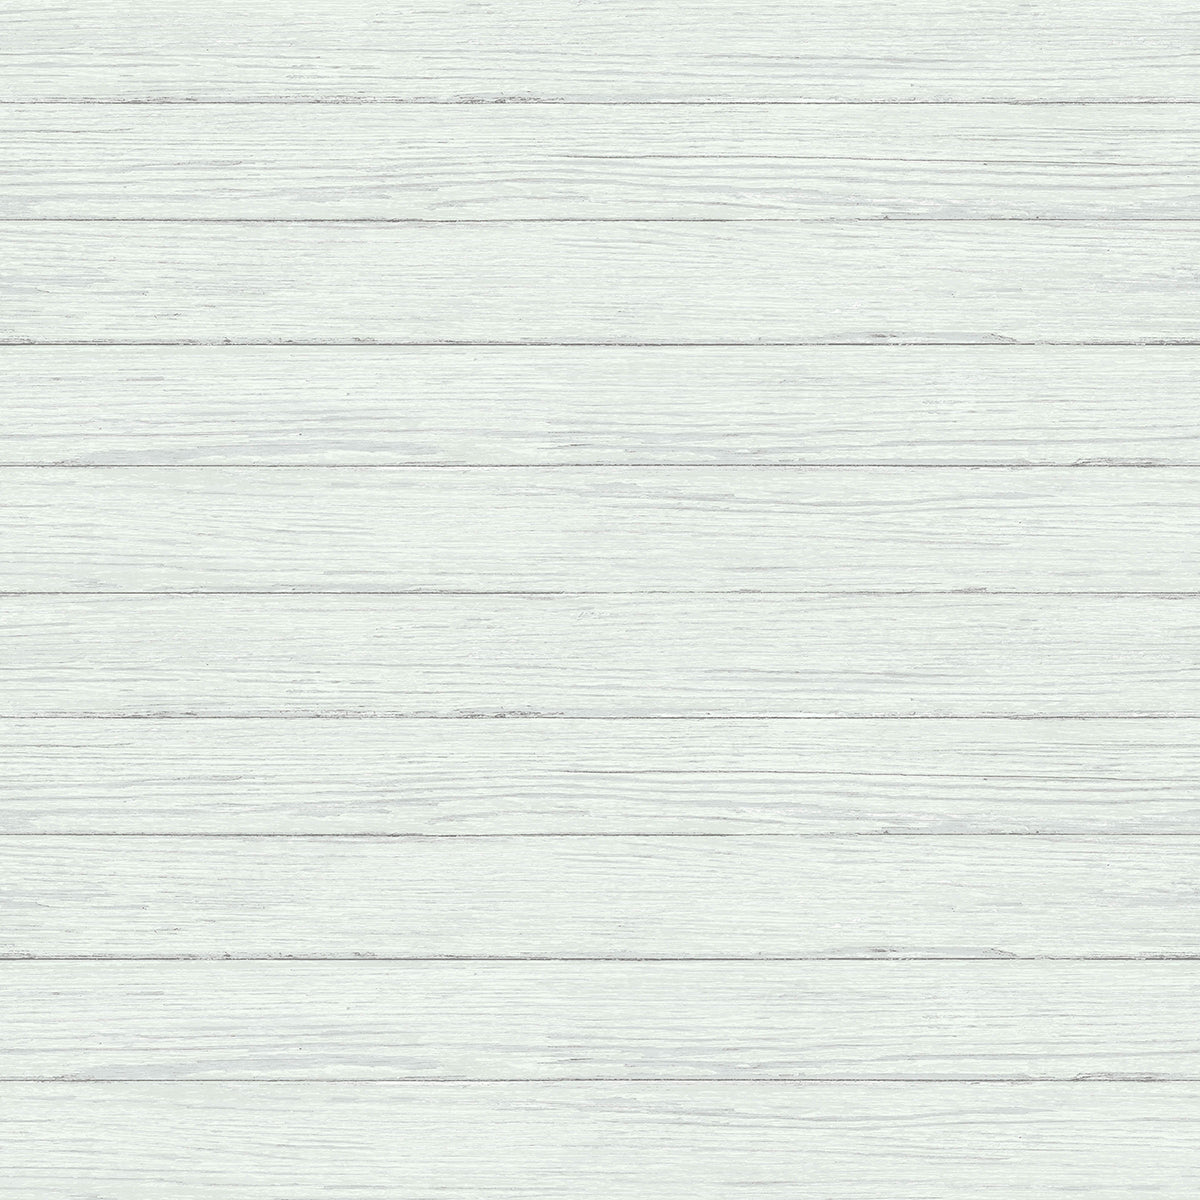 Picture of Ozma Light Blue Wood Plank Wallpaper